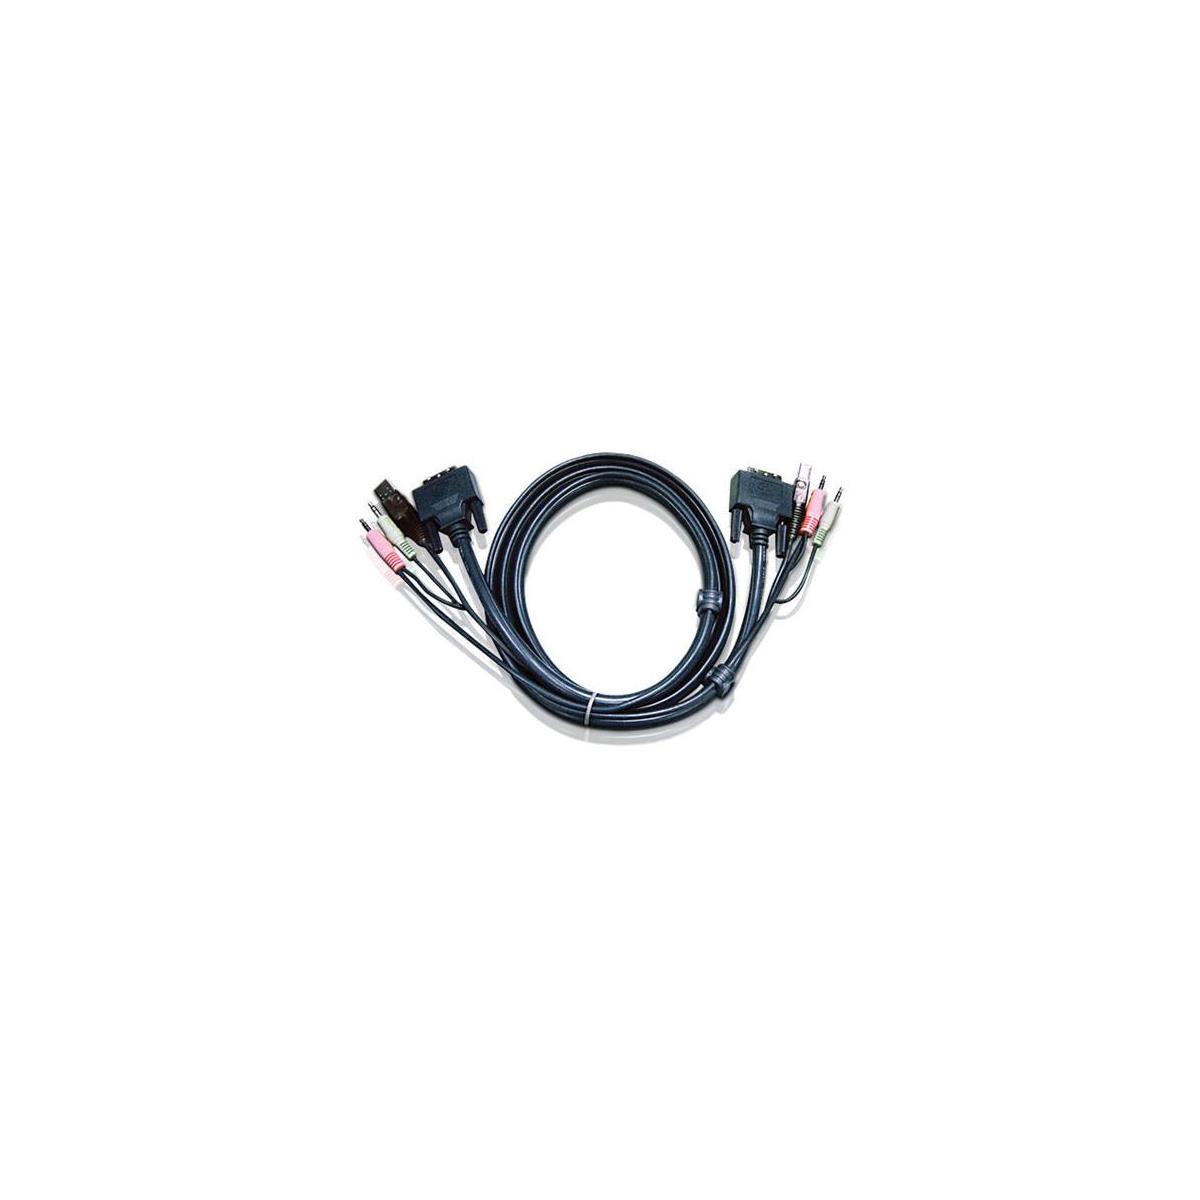 

Aten 2L7D02UI 6' USB DVI-I Single Link Cable for Console and KVM Switches